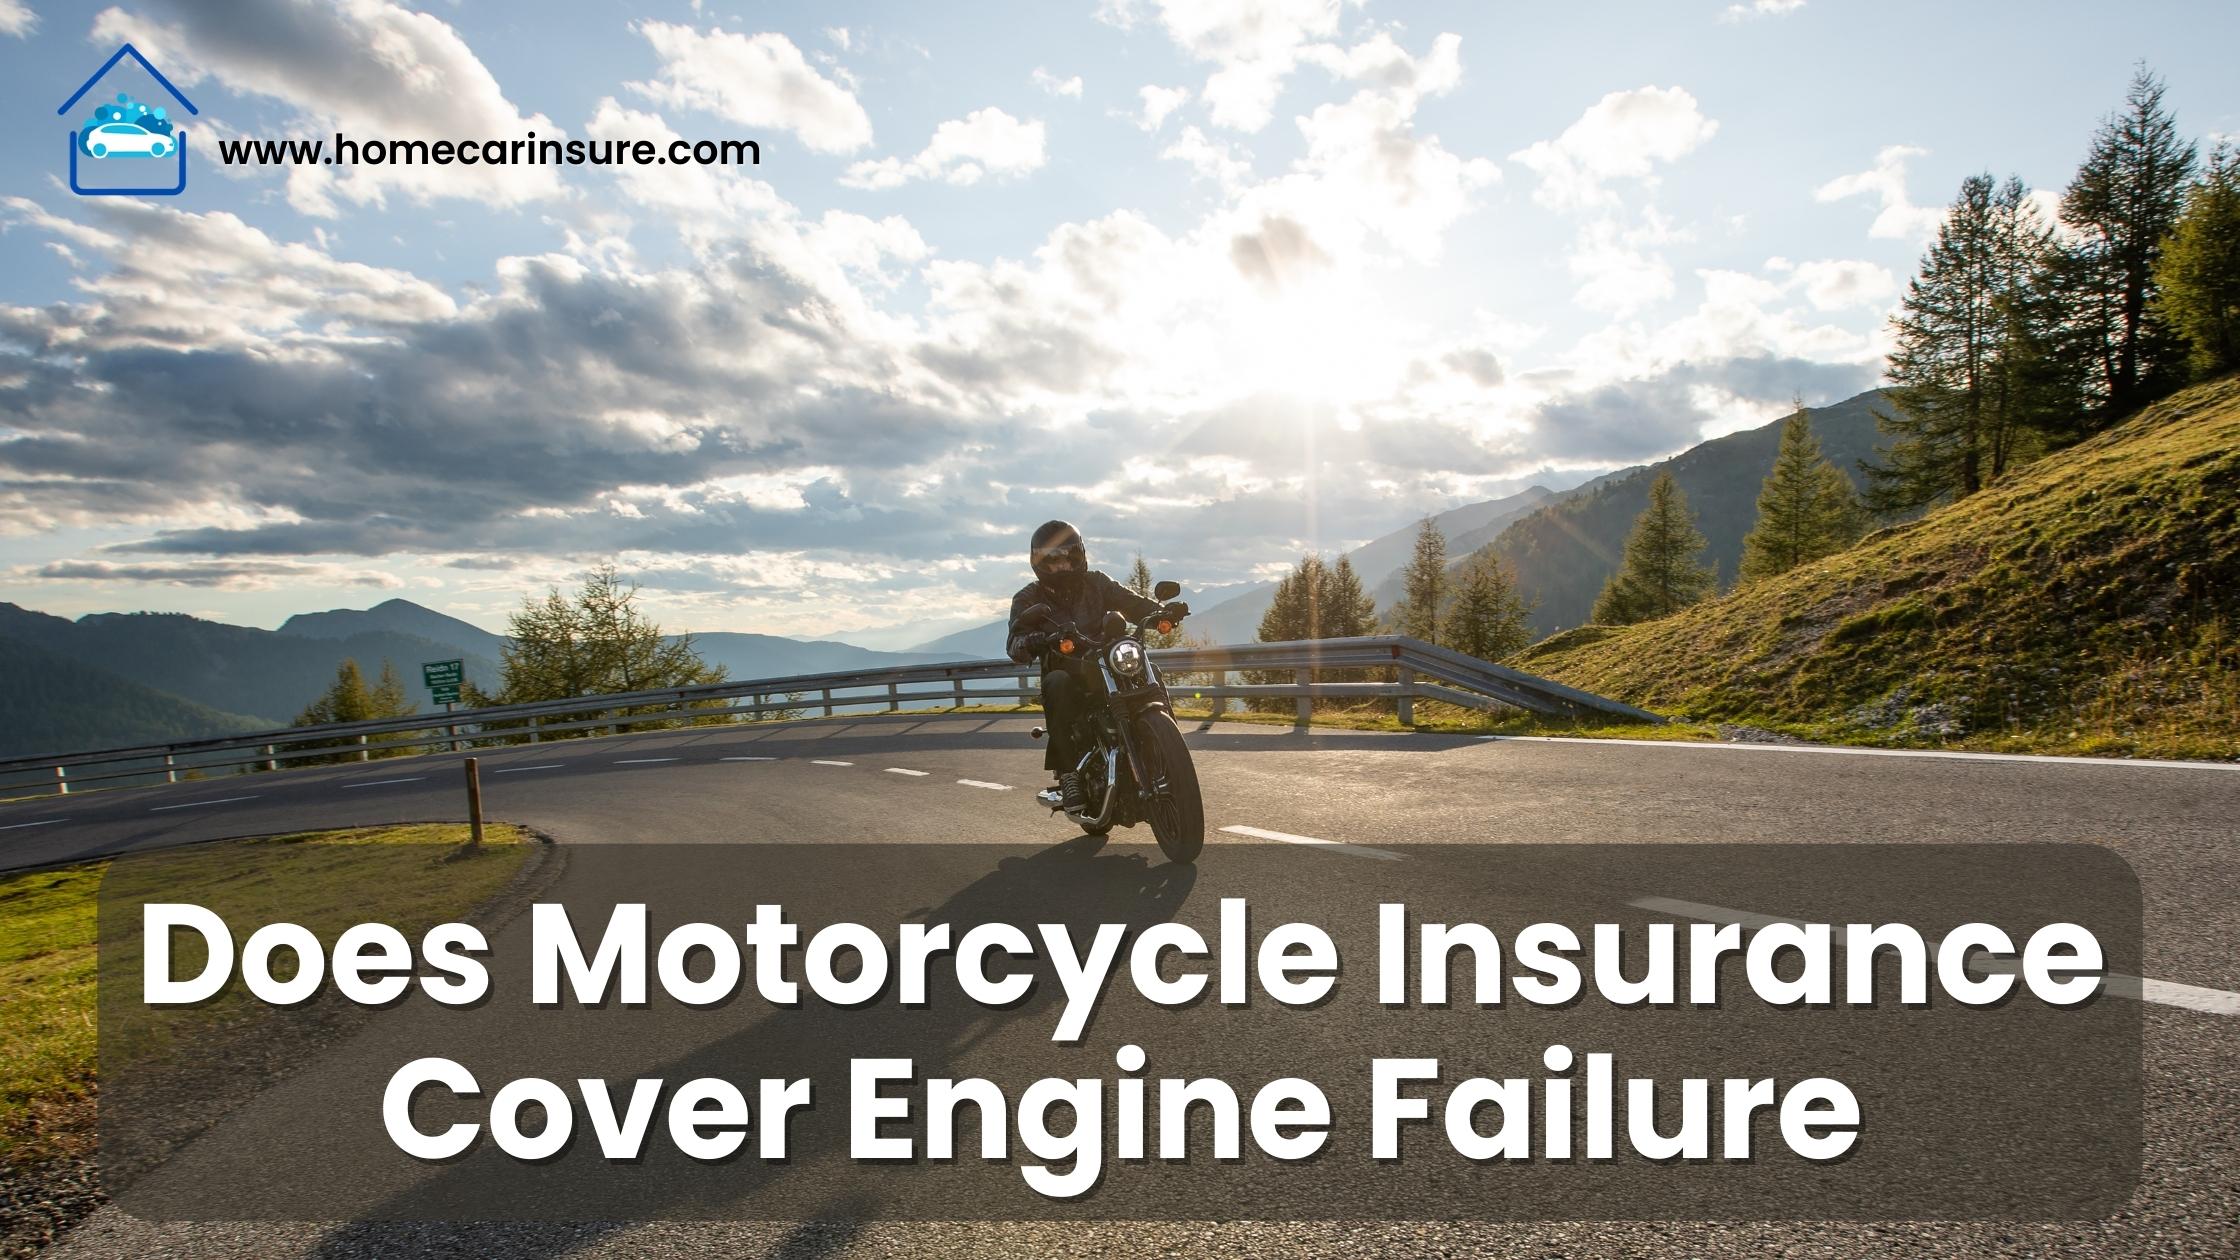 Does Motorcycle Insurance Cover Engine Failure